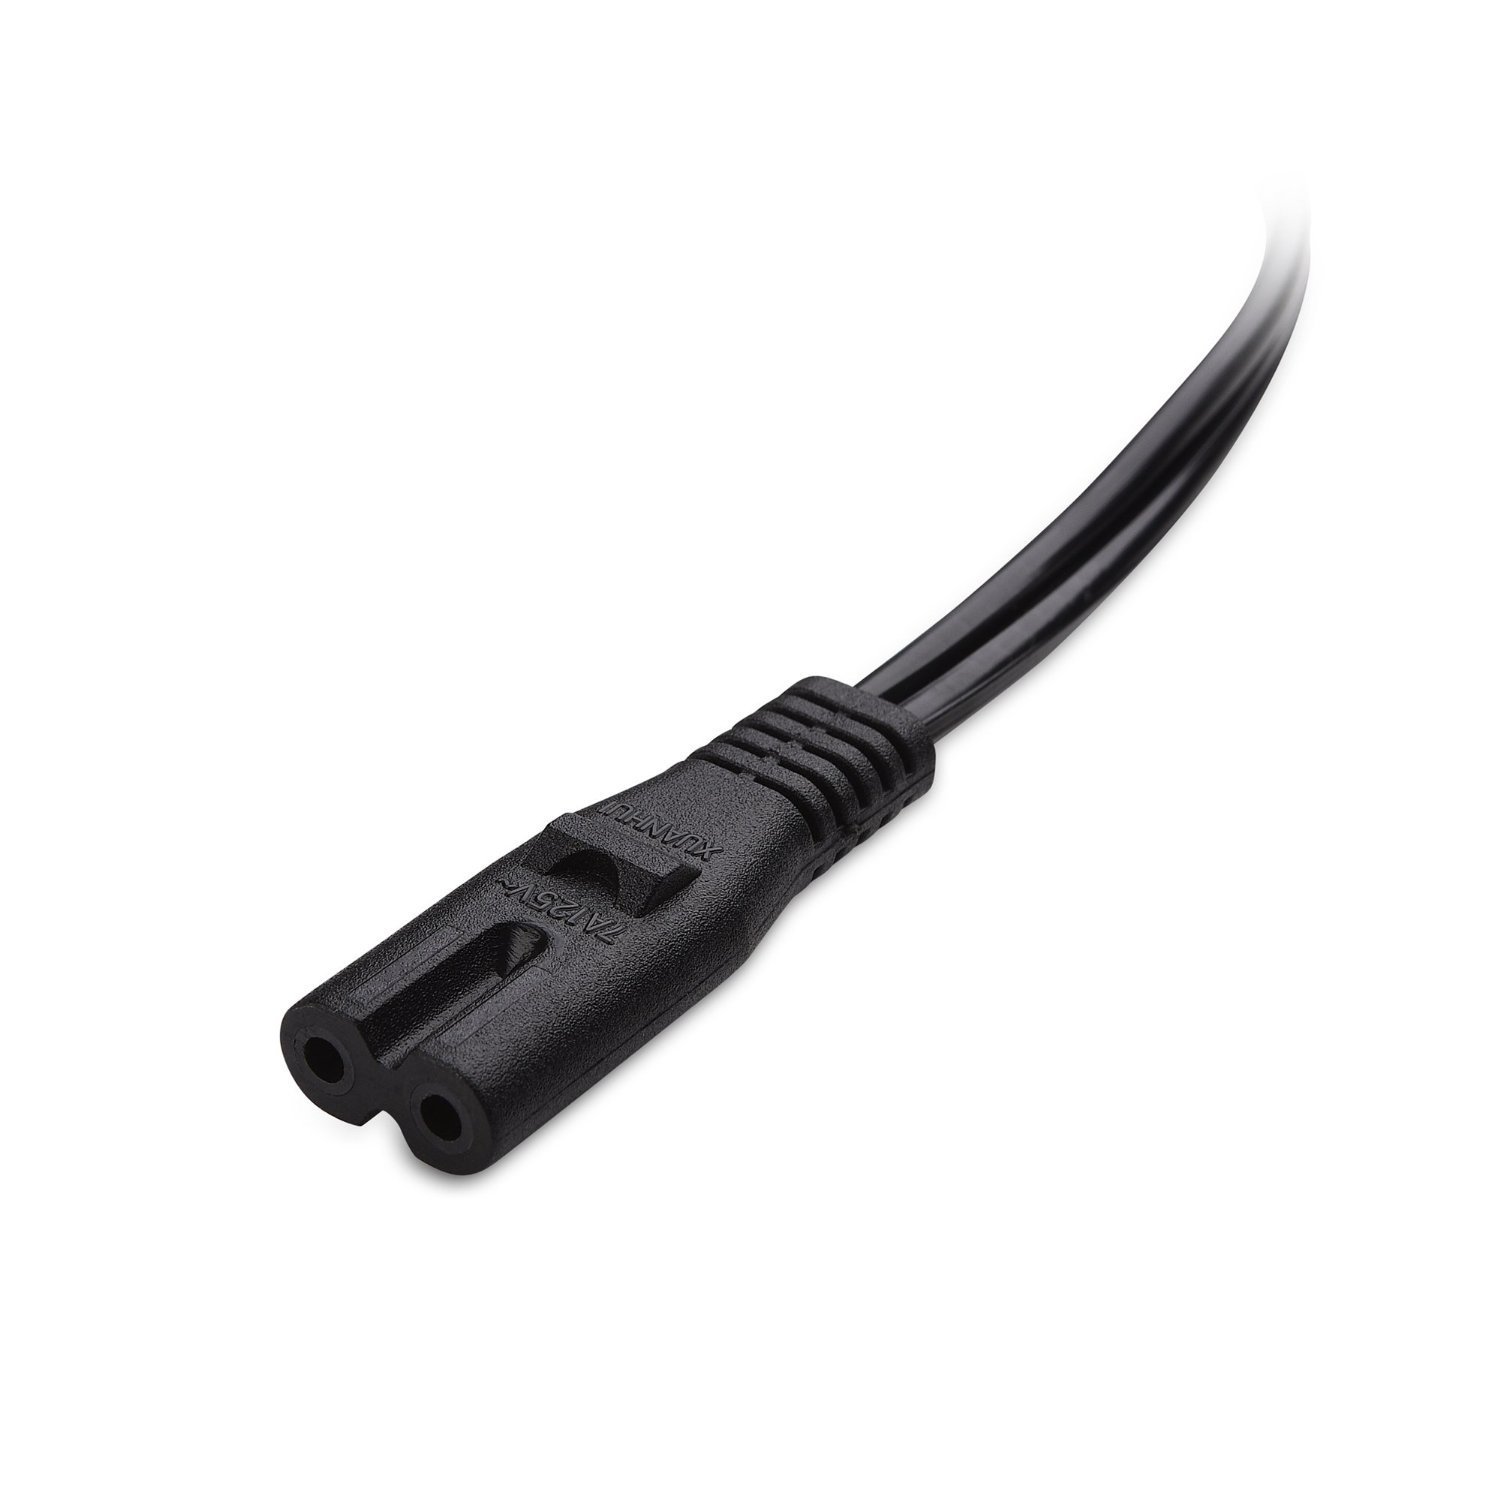 OMNIHIL AC Power Cord for Yamaha MusicCast WX-010 Wireless Speaker with Bluetooth (Black) - image 2 of 4